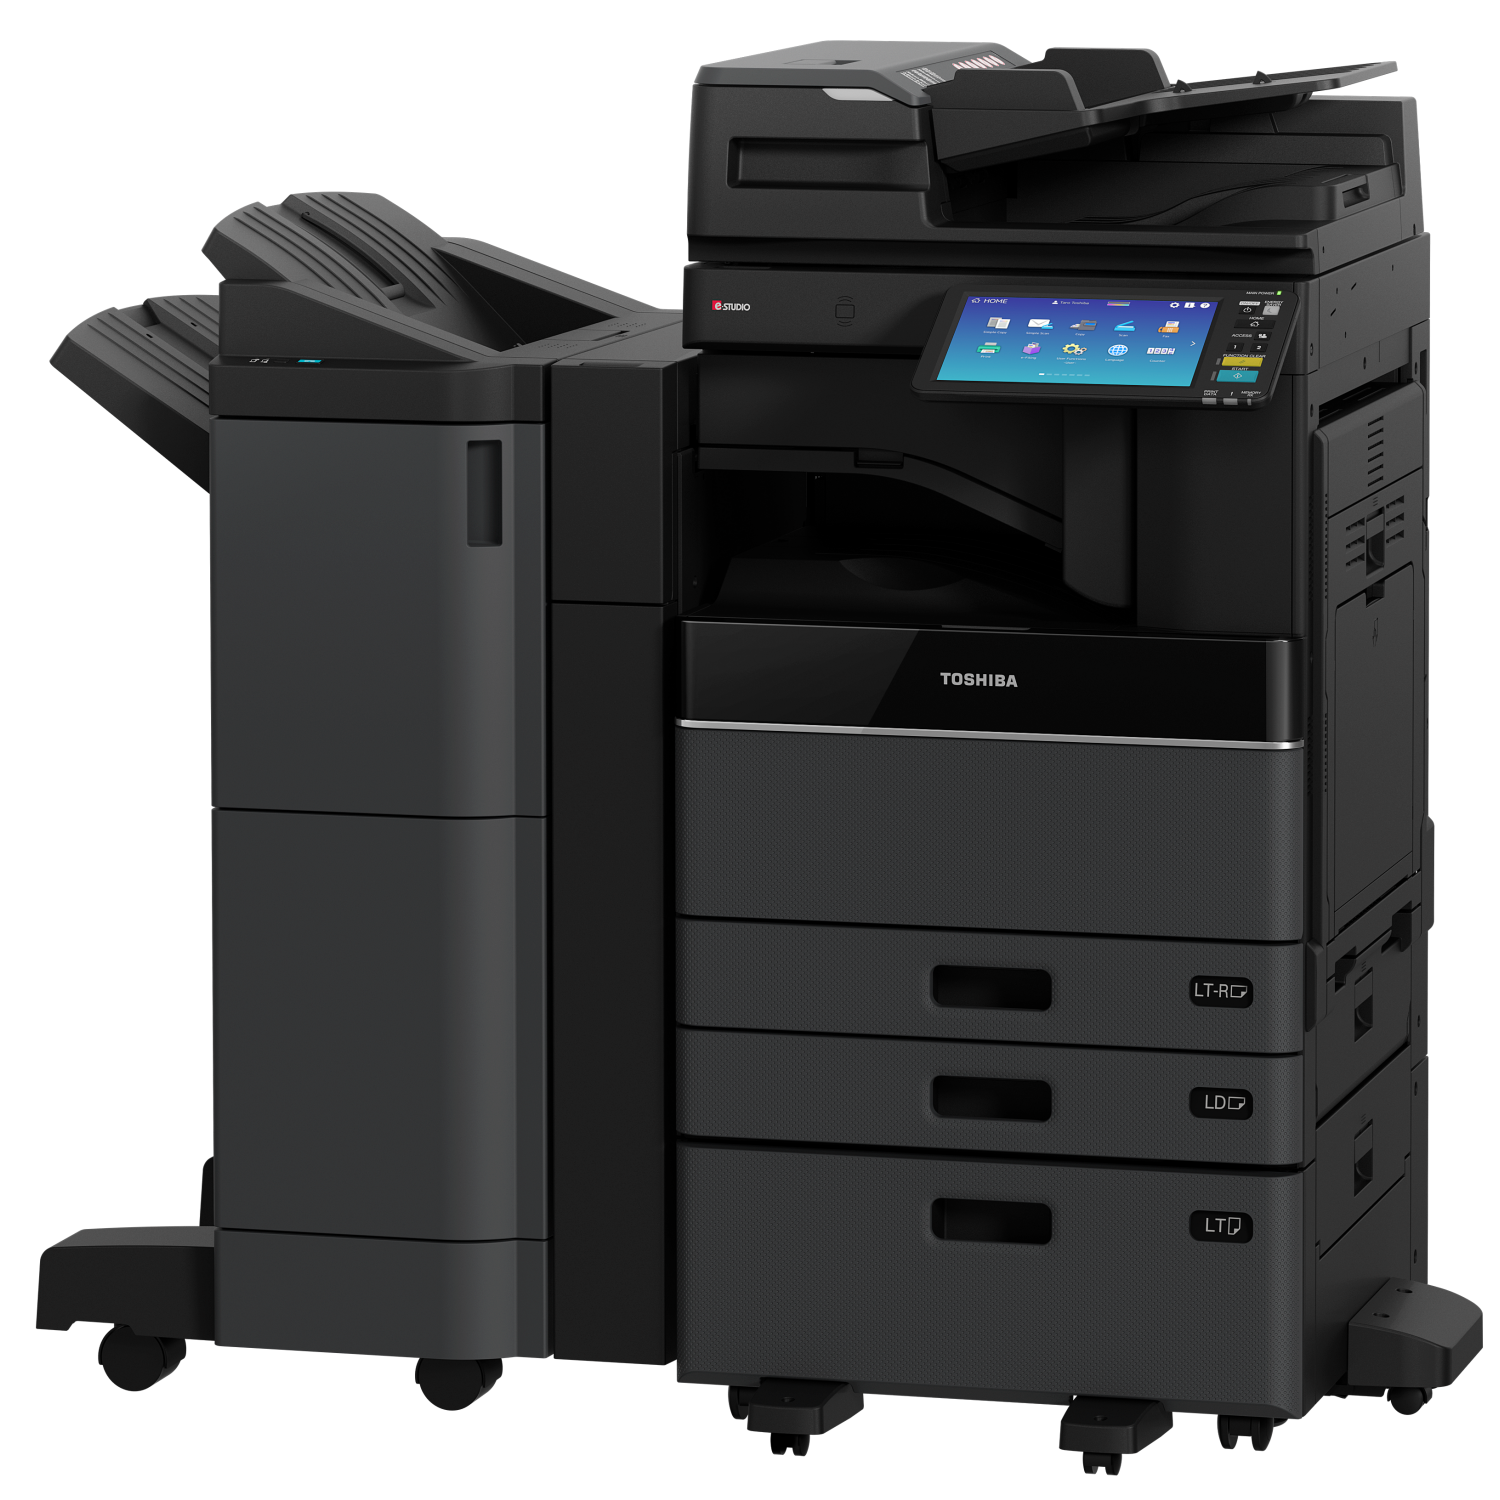 Toshiba E-Studio 4518A Monochrome Multifunction Printer Copier Scanner, Speed Upto 45 PPM For Small And Medium Size Business